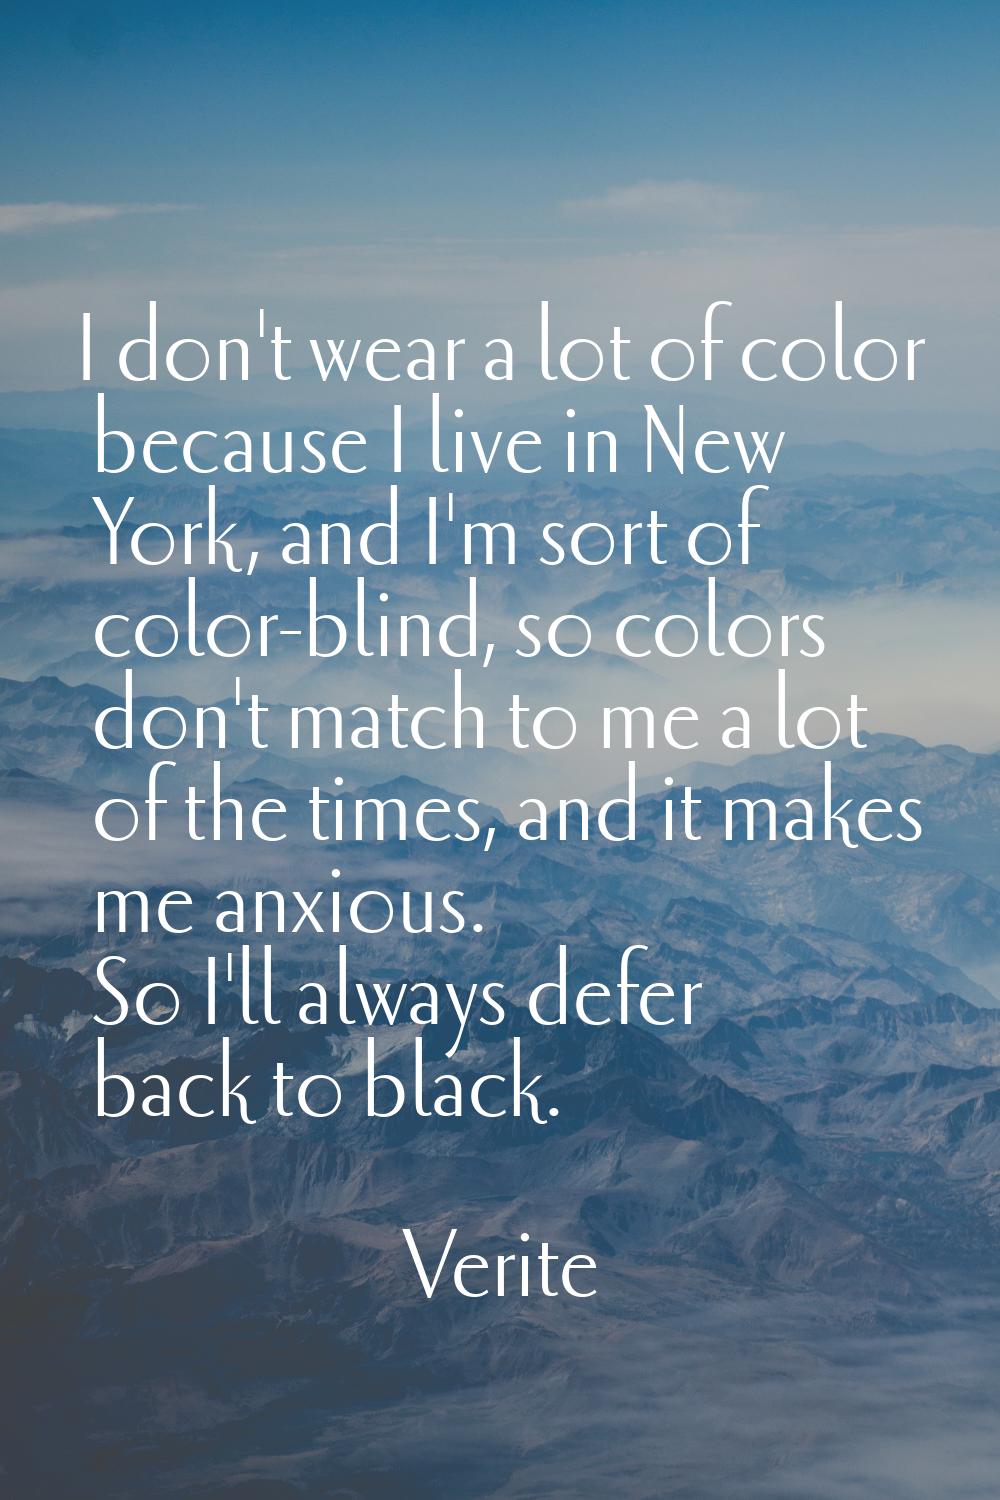 I don't wear a lot of color because I live in New York, and I'm sort of color-blind, so colors don'